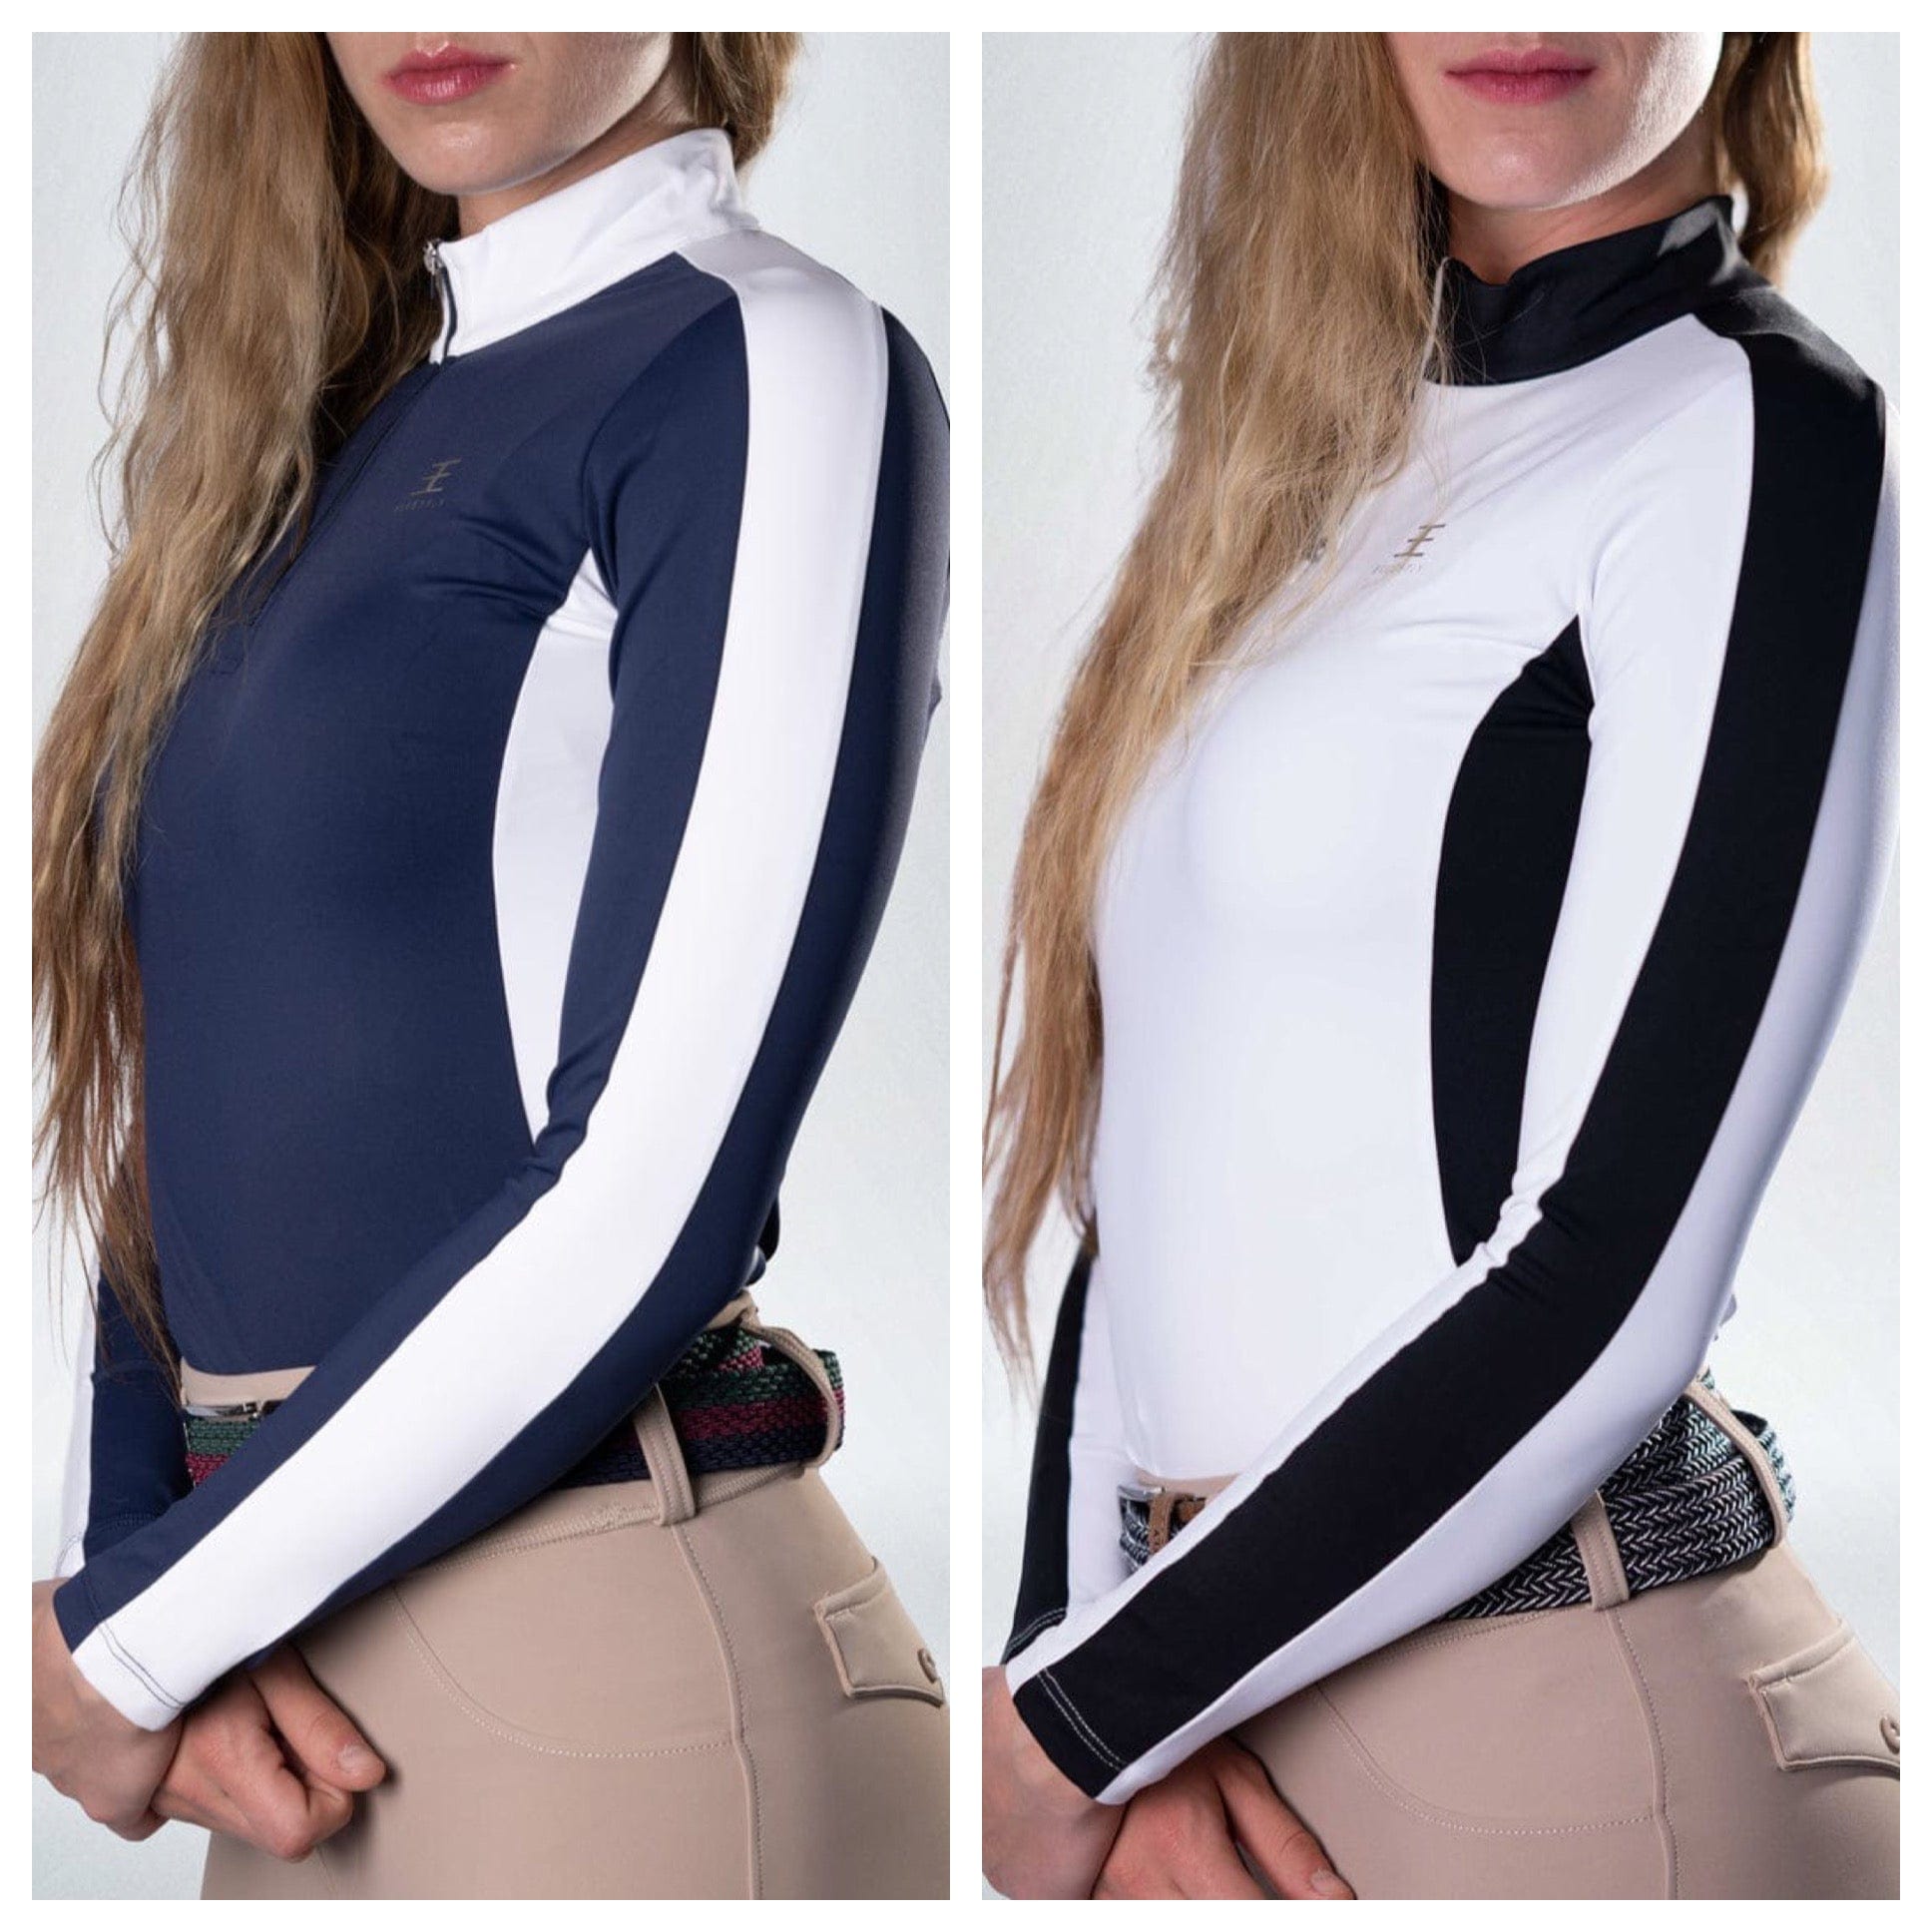 Equestly Women's Shirt Equestly- Two Toned Quarter Zip equestrian team apparel online tack store mobile tack store custom farm apparel custom show stable clothing equestrian lifestyle horse show clothing riding clothes horses equestrian tack store